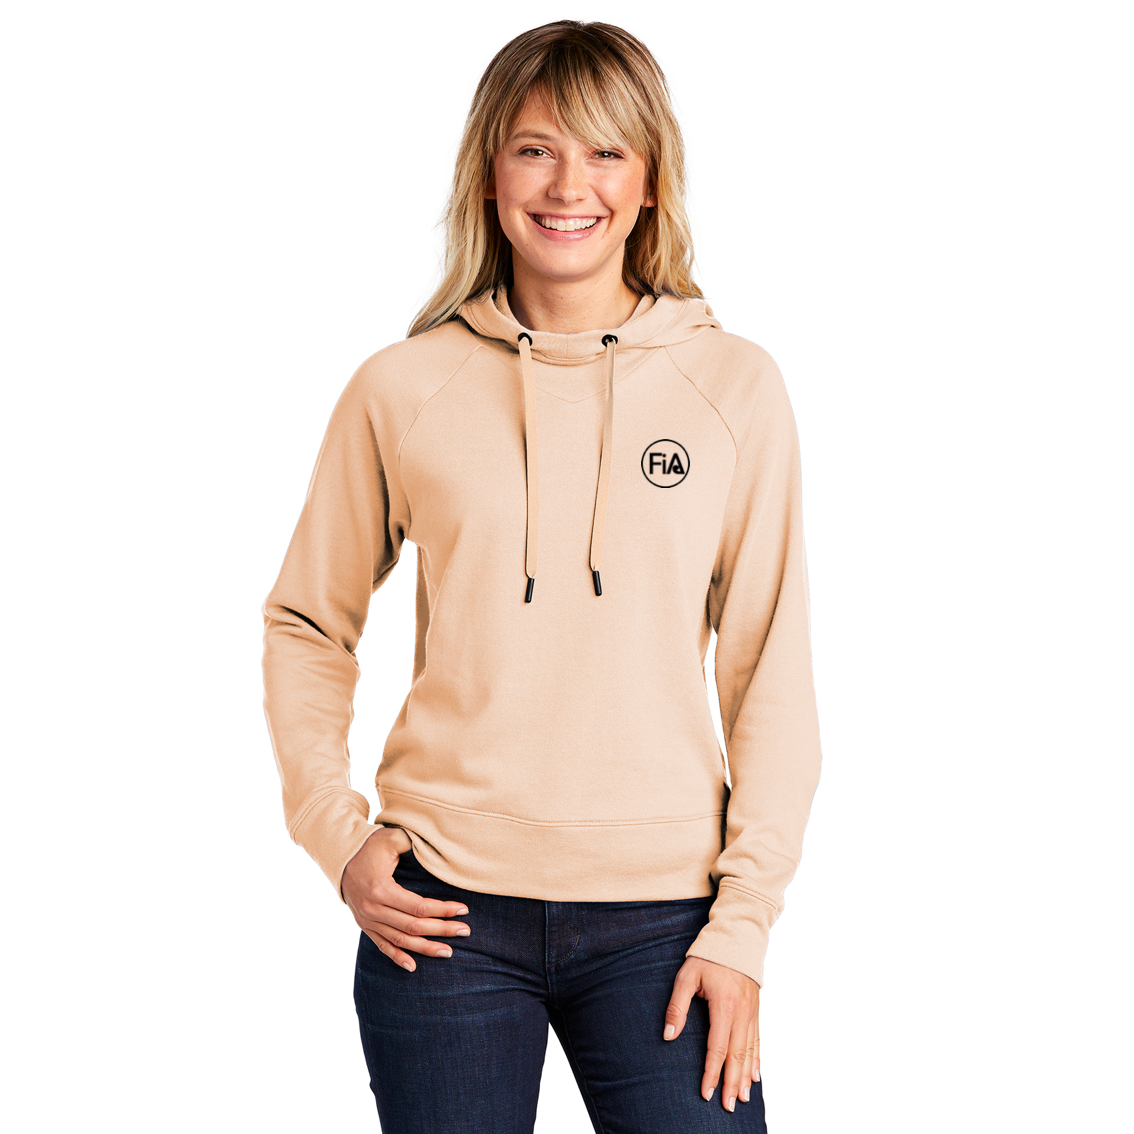 FiA Sport-Tek Ladies Lightweight French Terry Pullover Hoodie - Made to Order